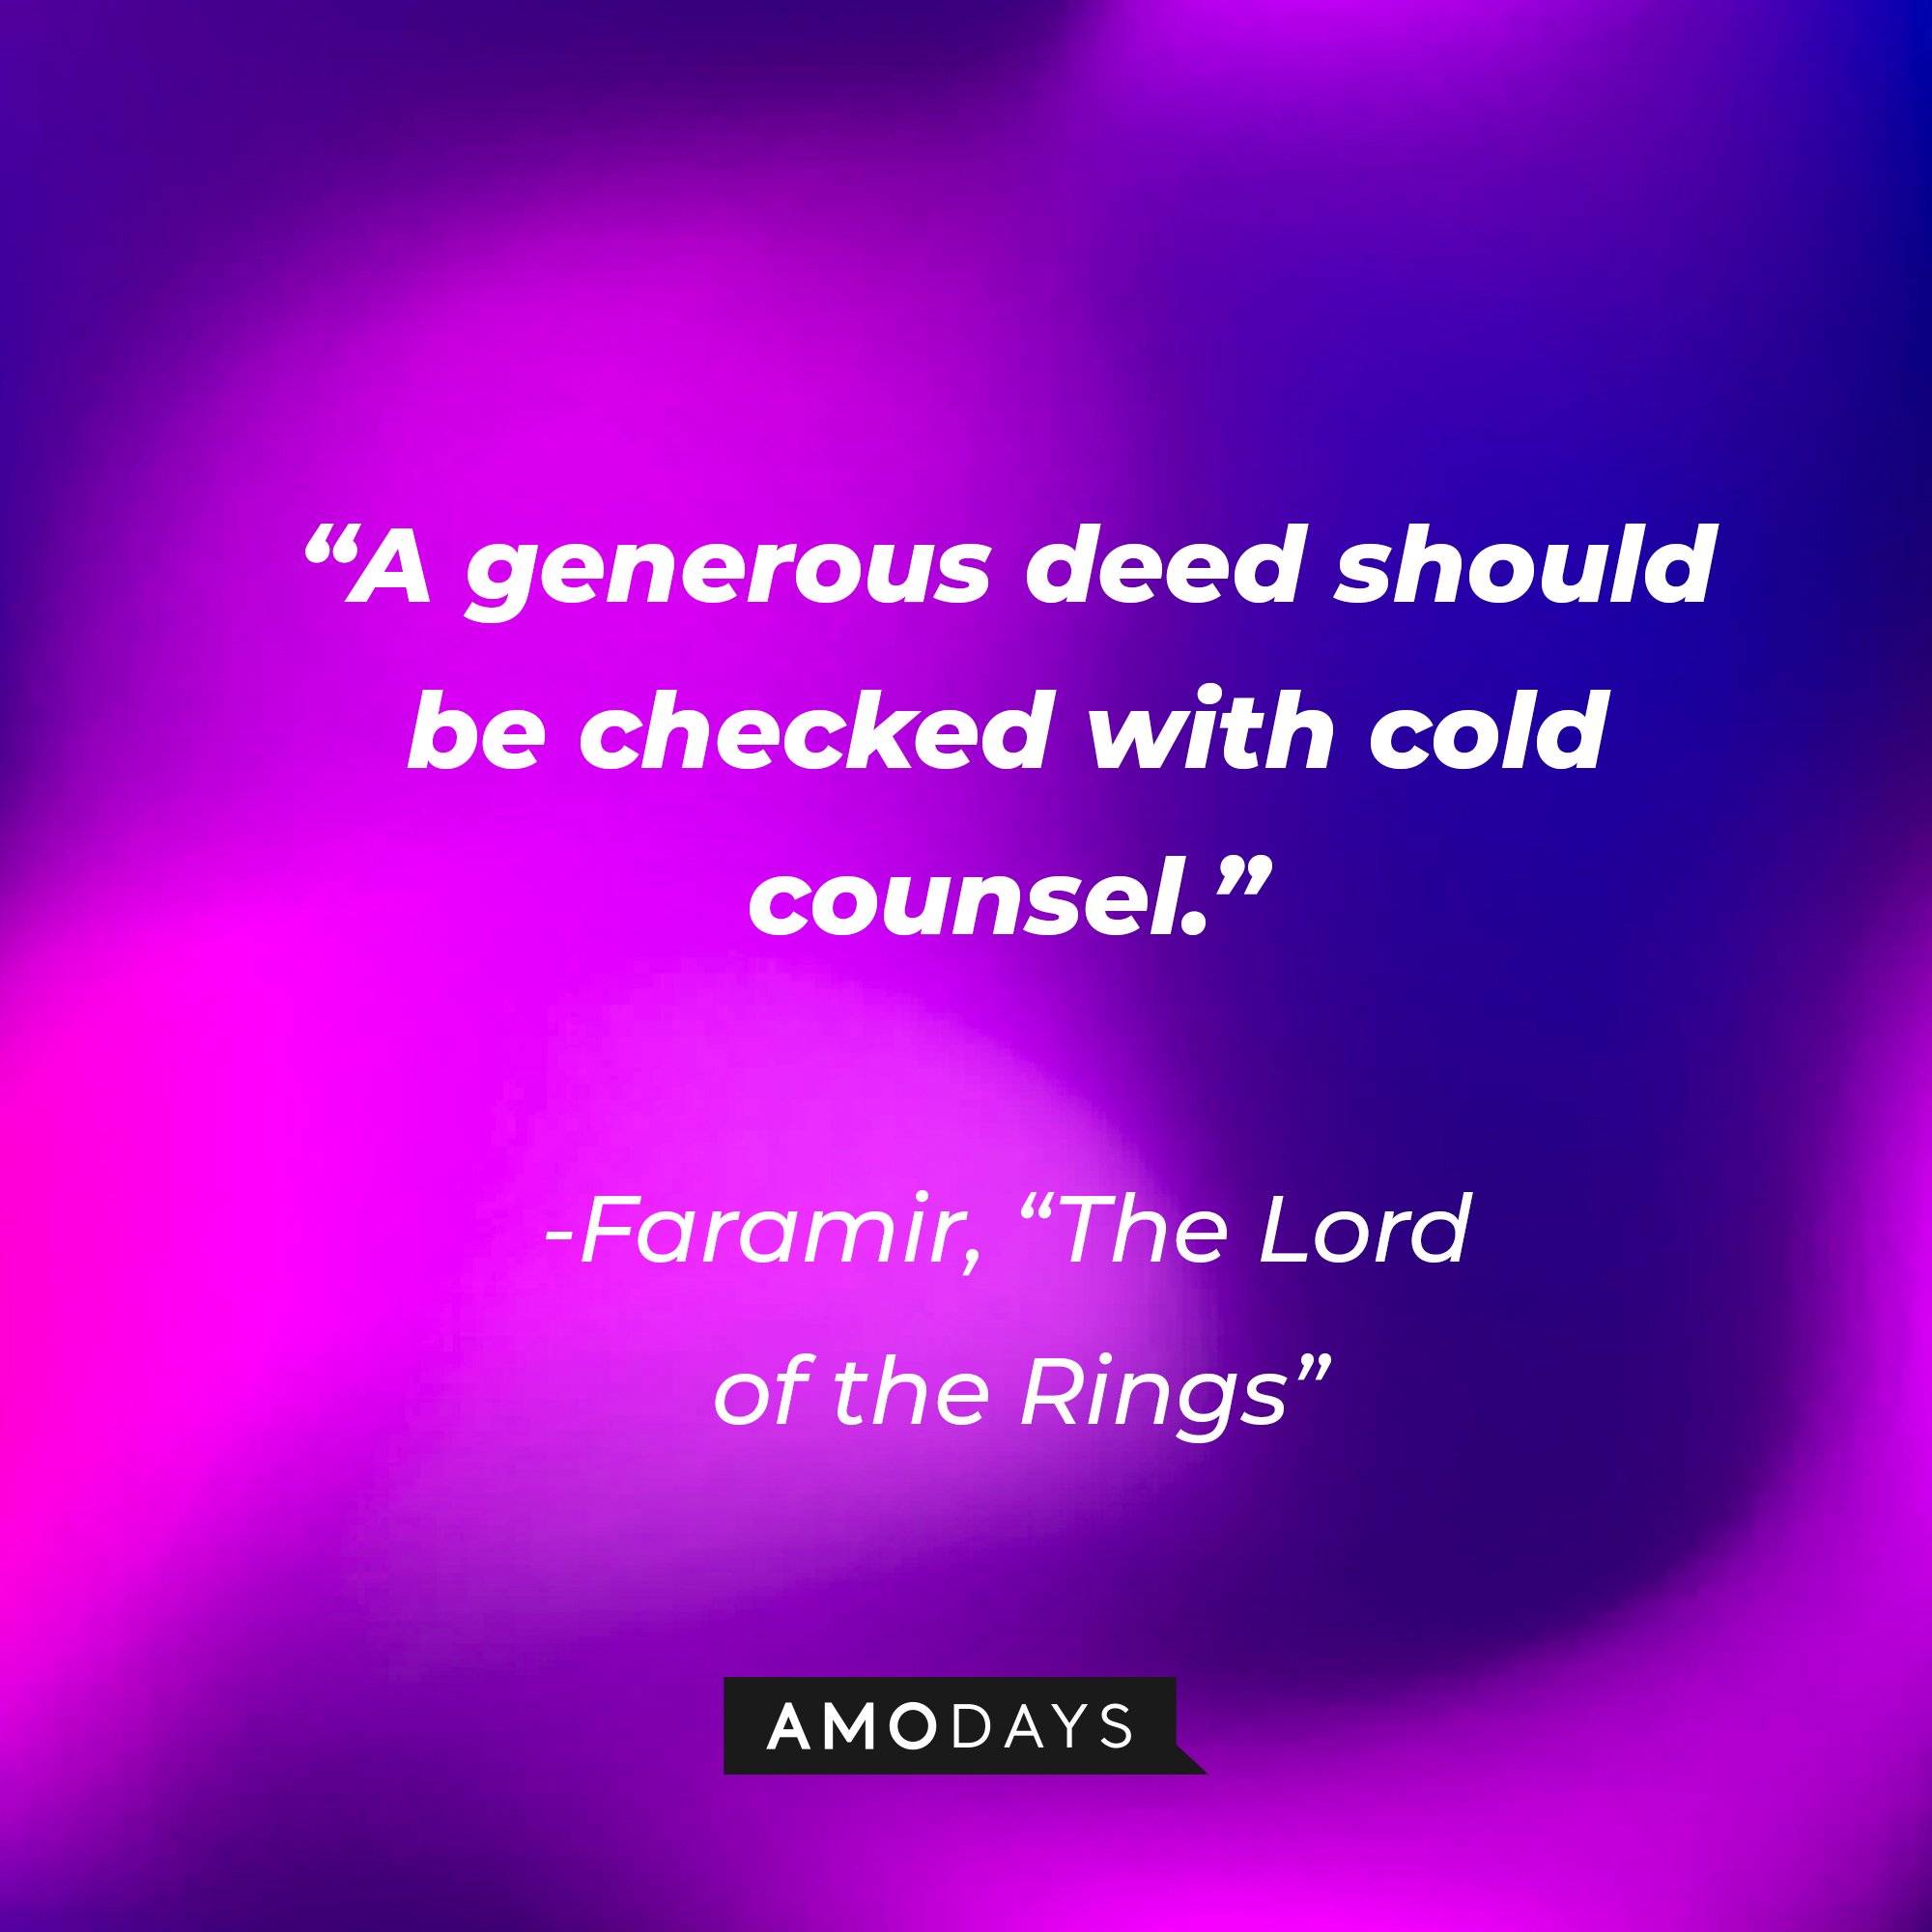 Faramir's quote from "The Lord of the Rings": "A generous deed should be checked with cold counsel." | Source: AmoDays